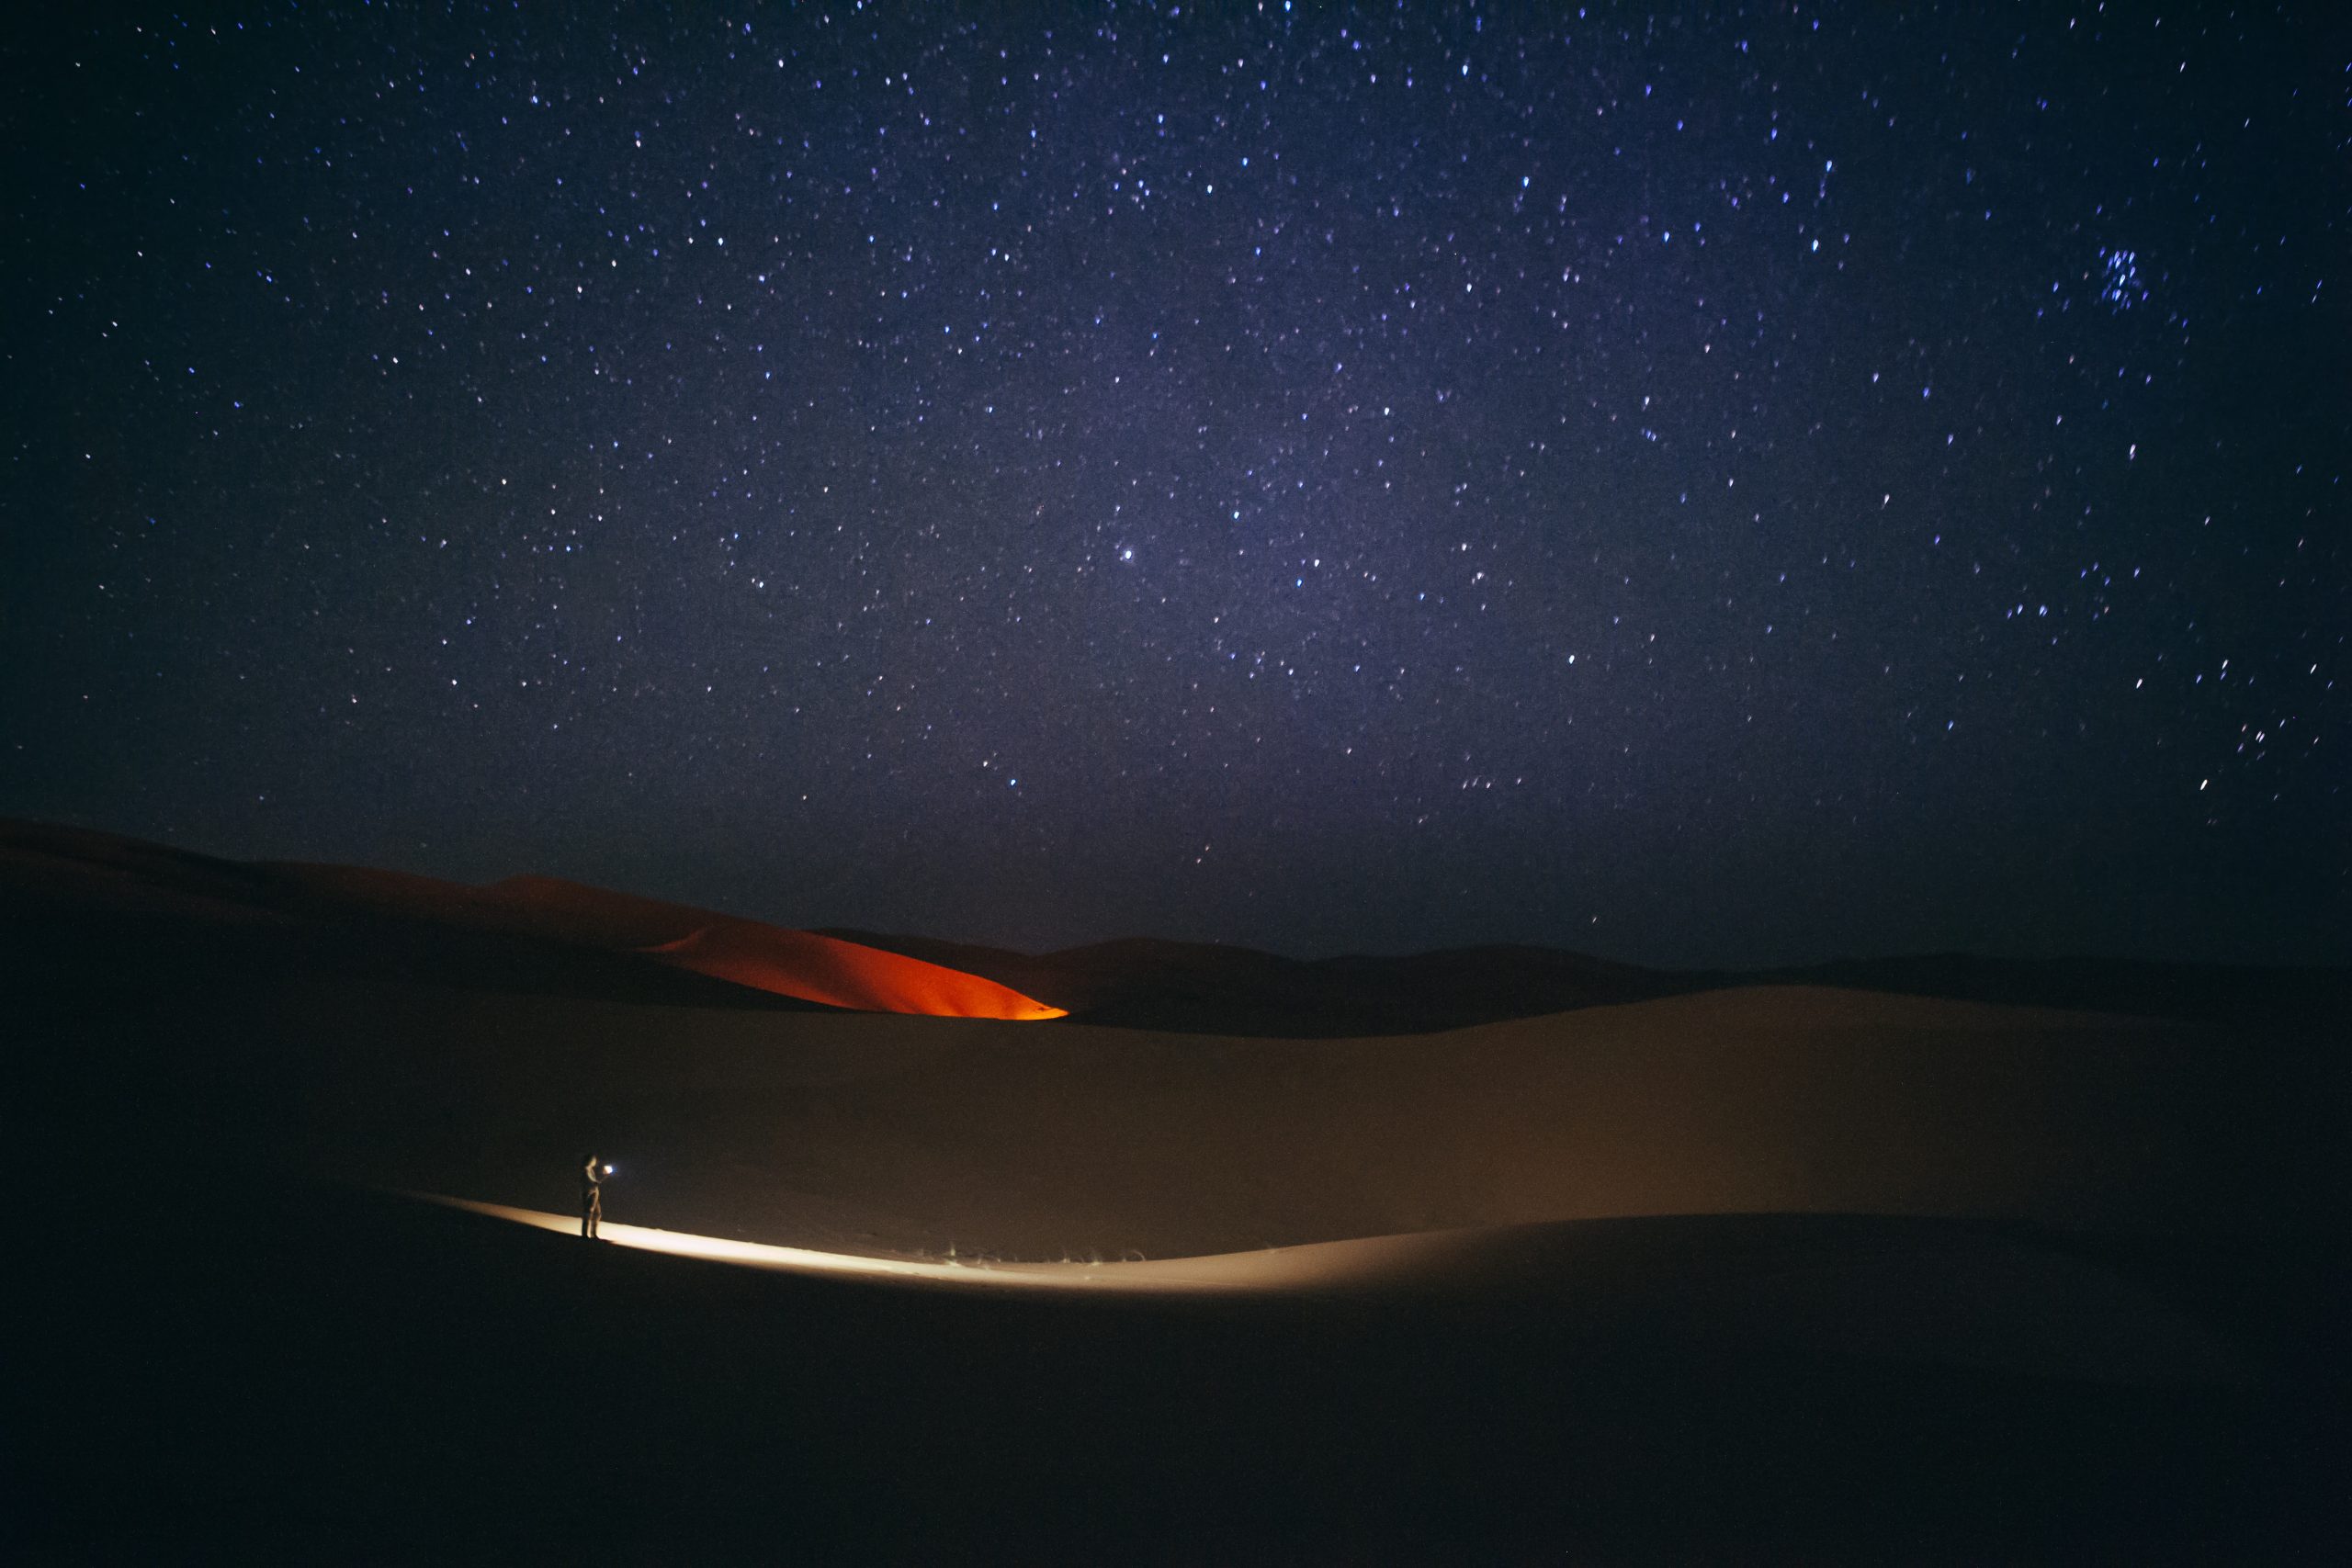 gallery image for Sahara Desert Stargazing with a local expert astronomer